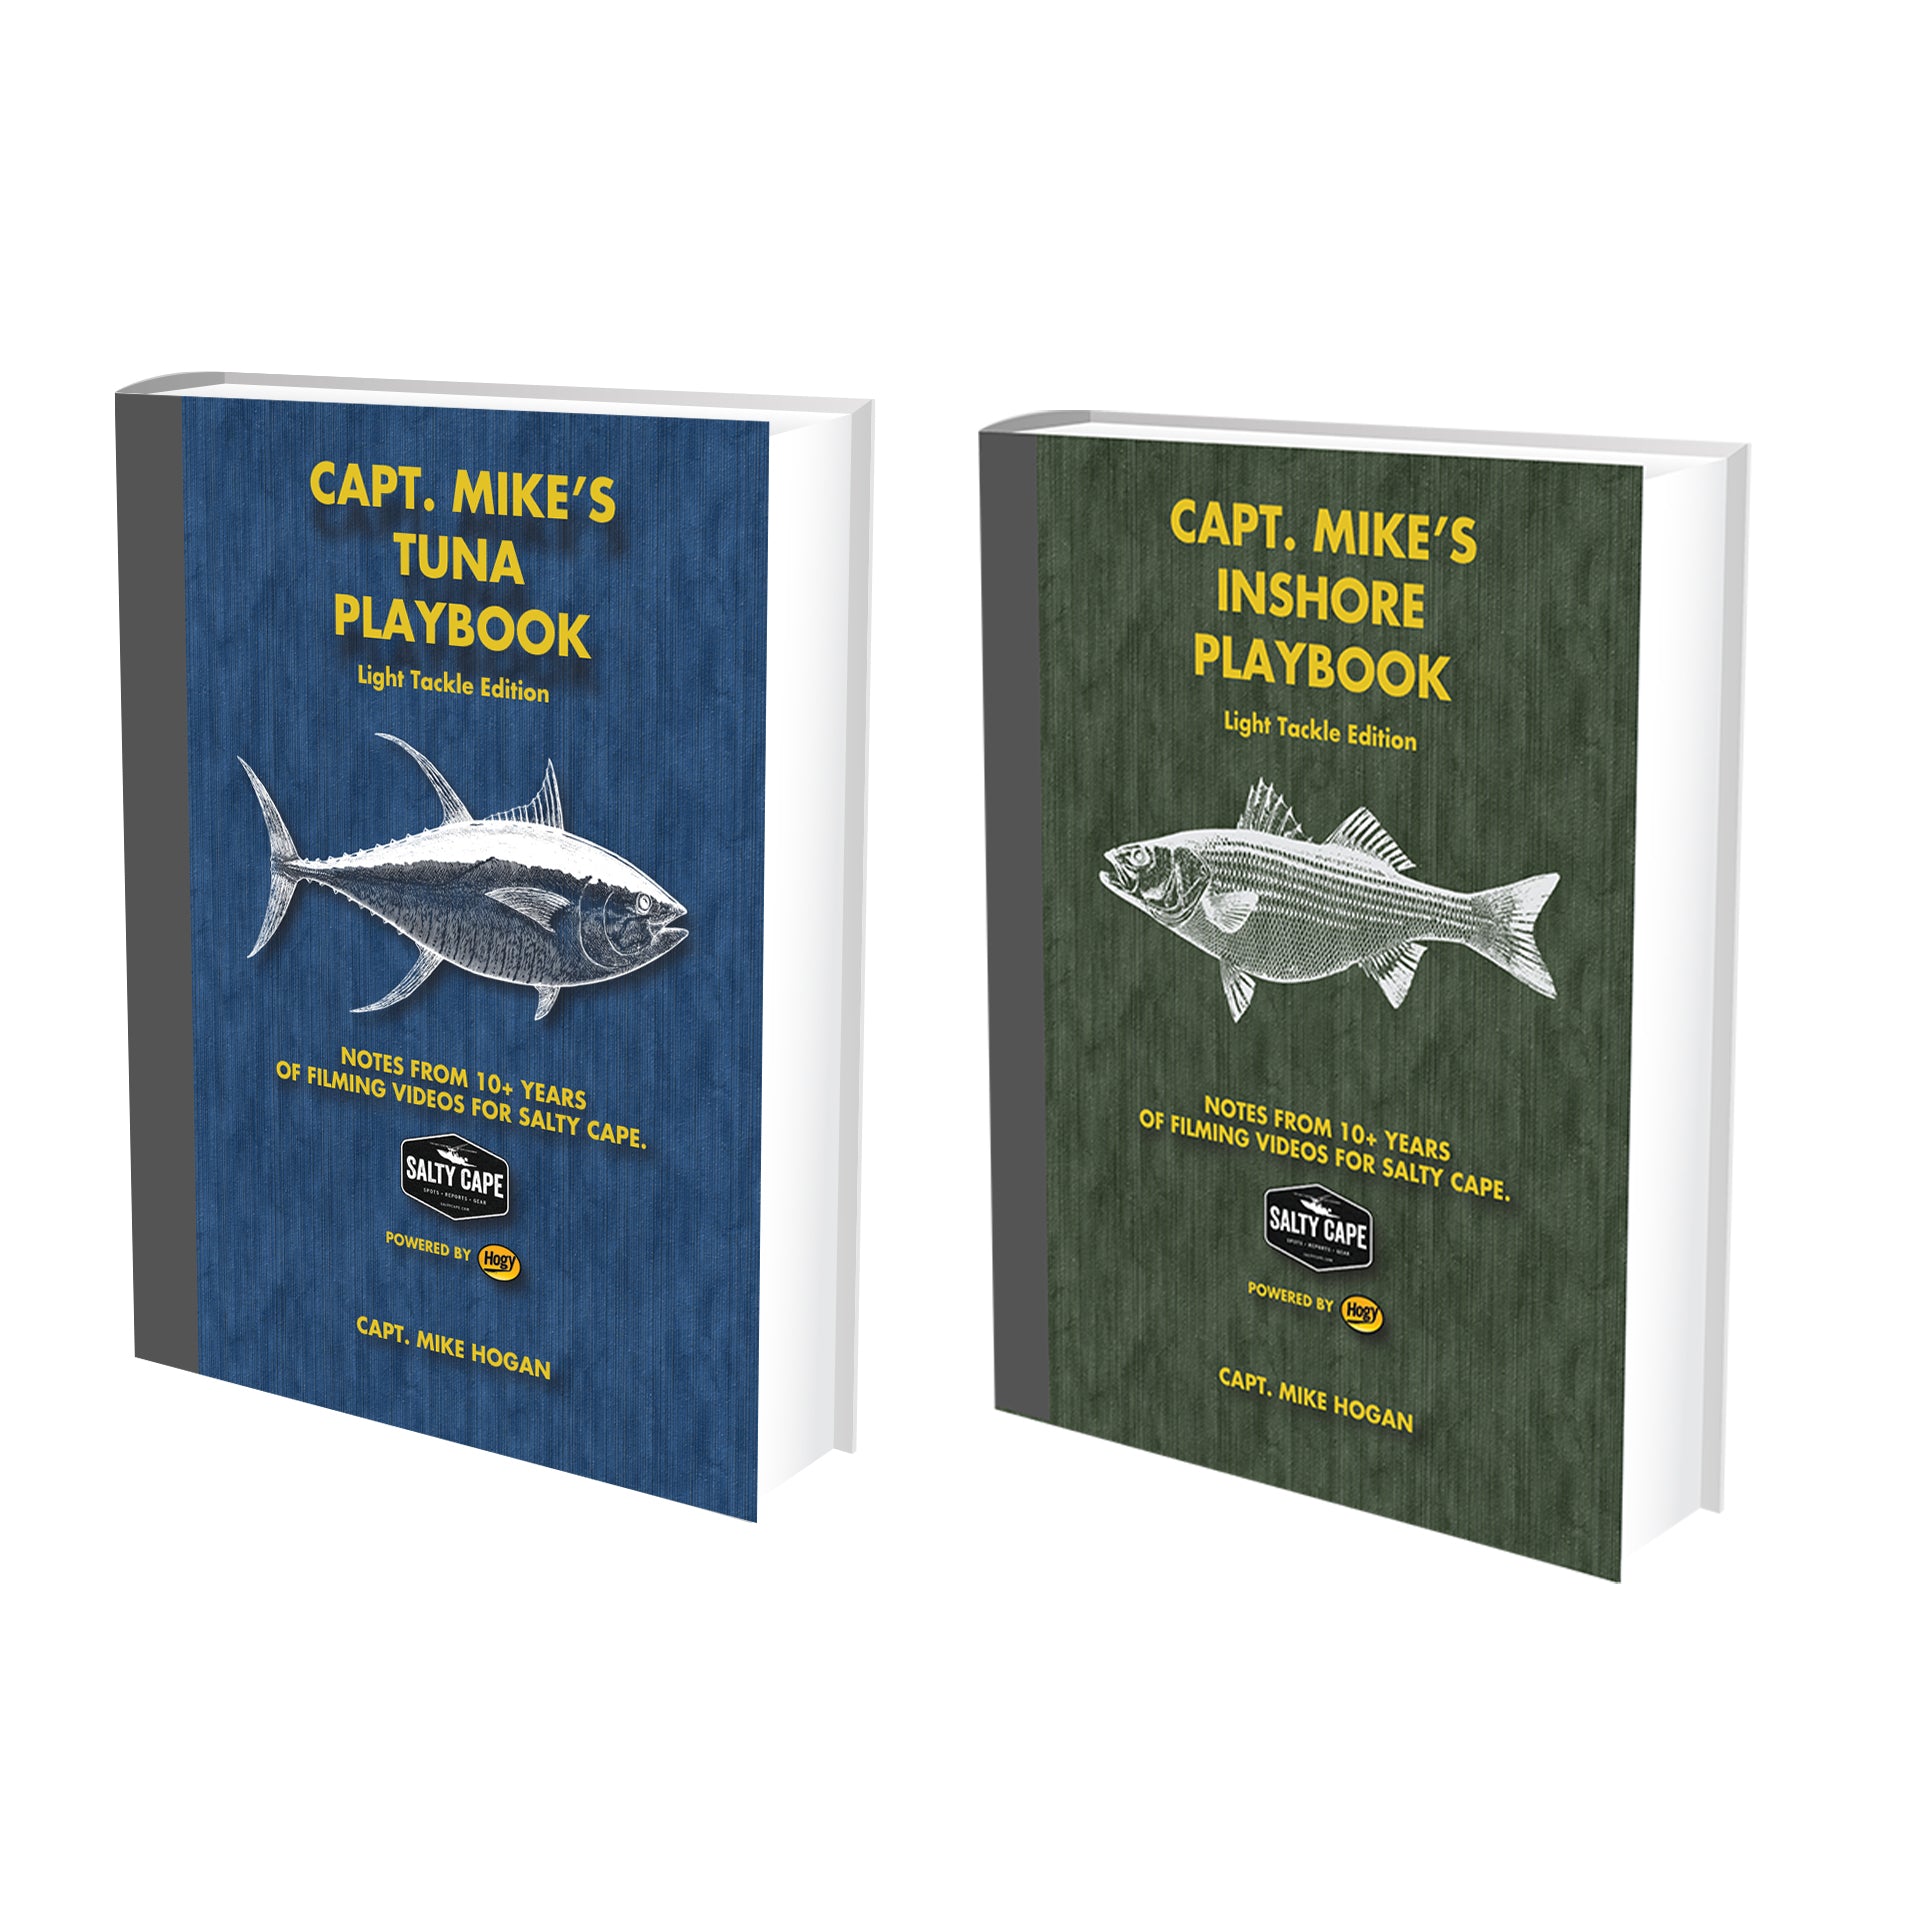 Insider Special: Northeast Printed Inshore + Offshore Playbook Bundle